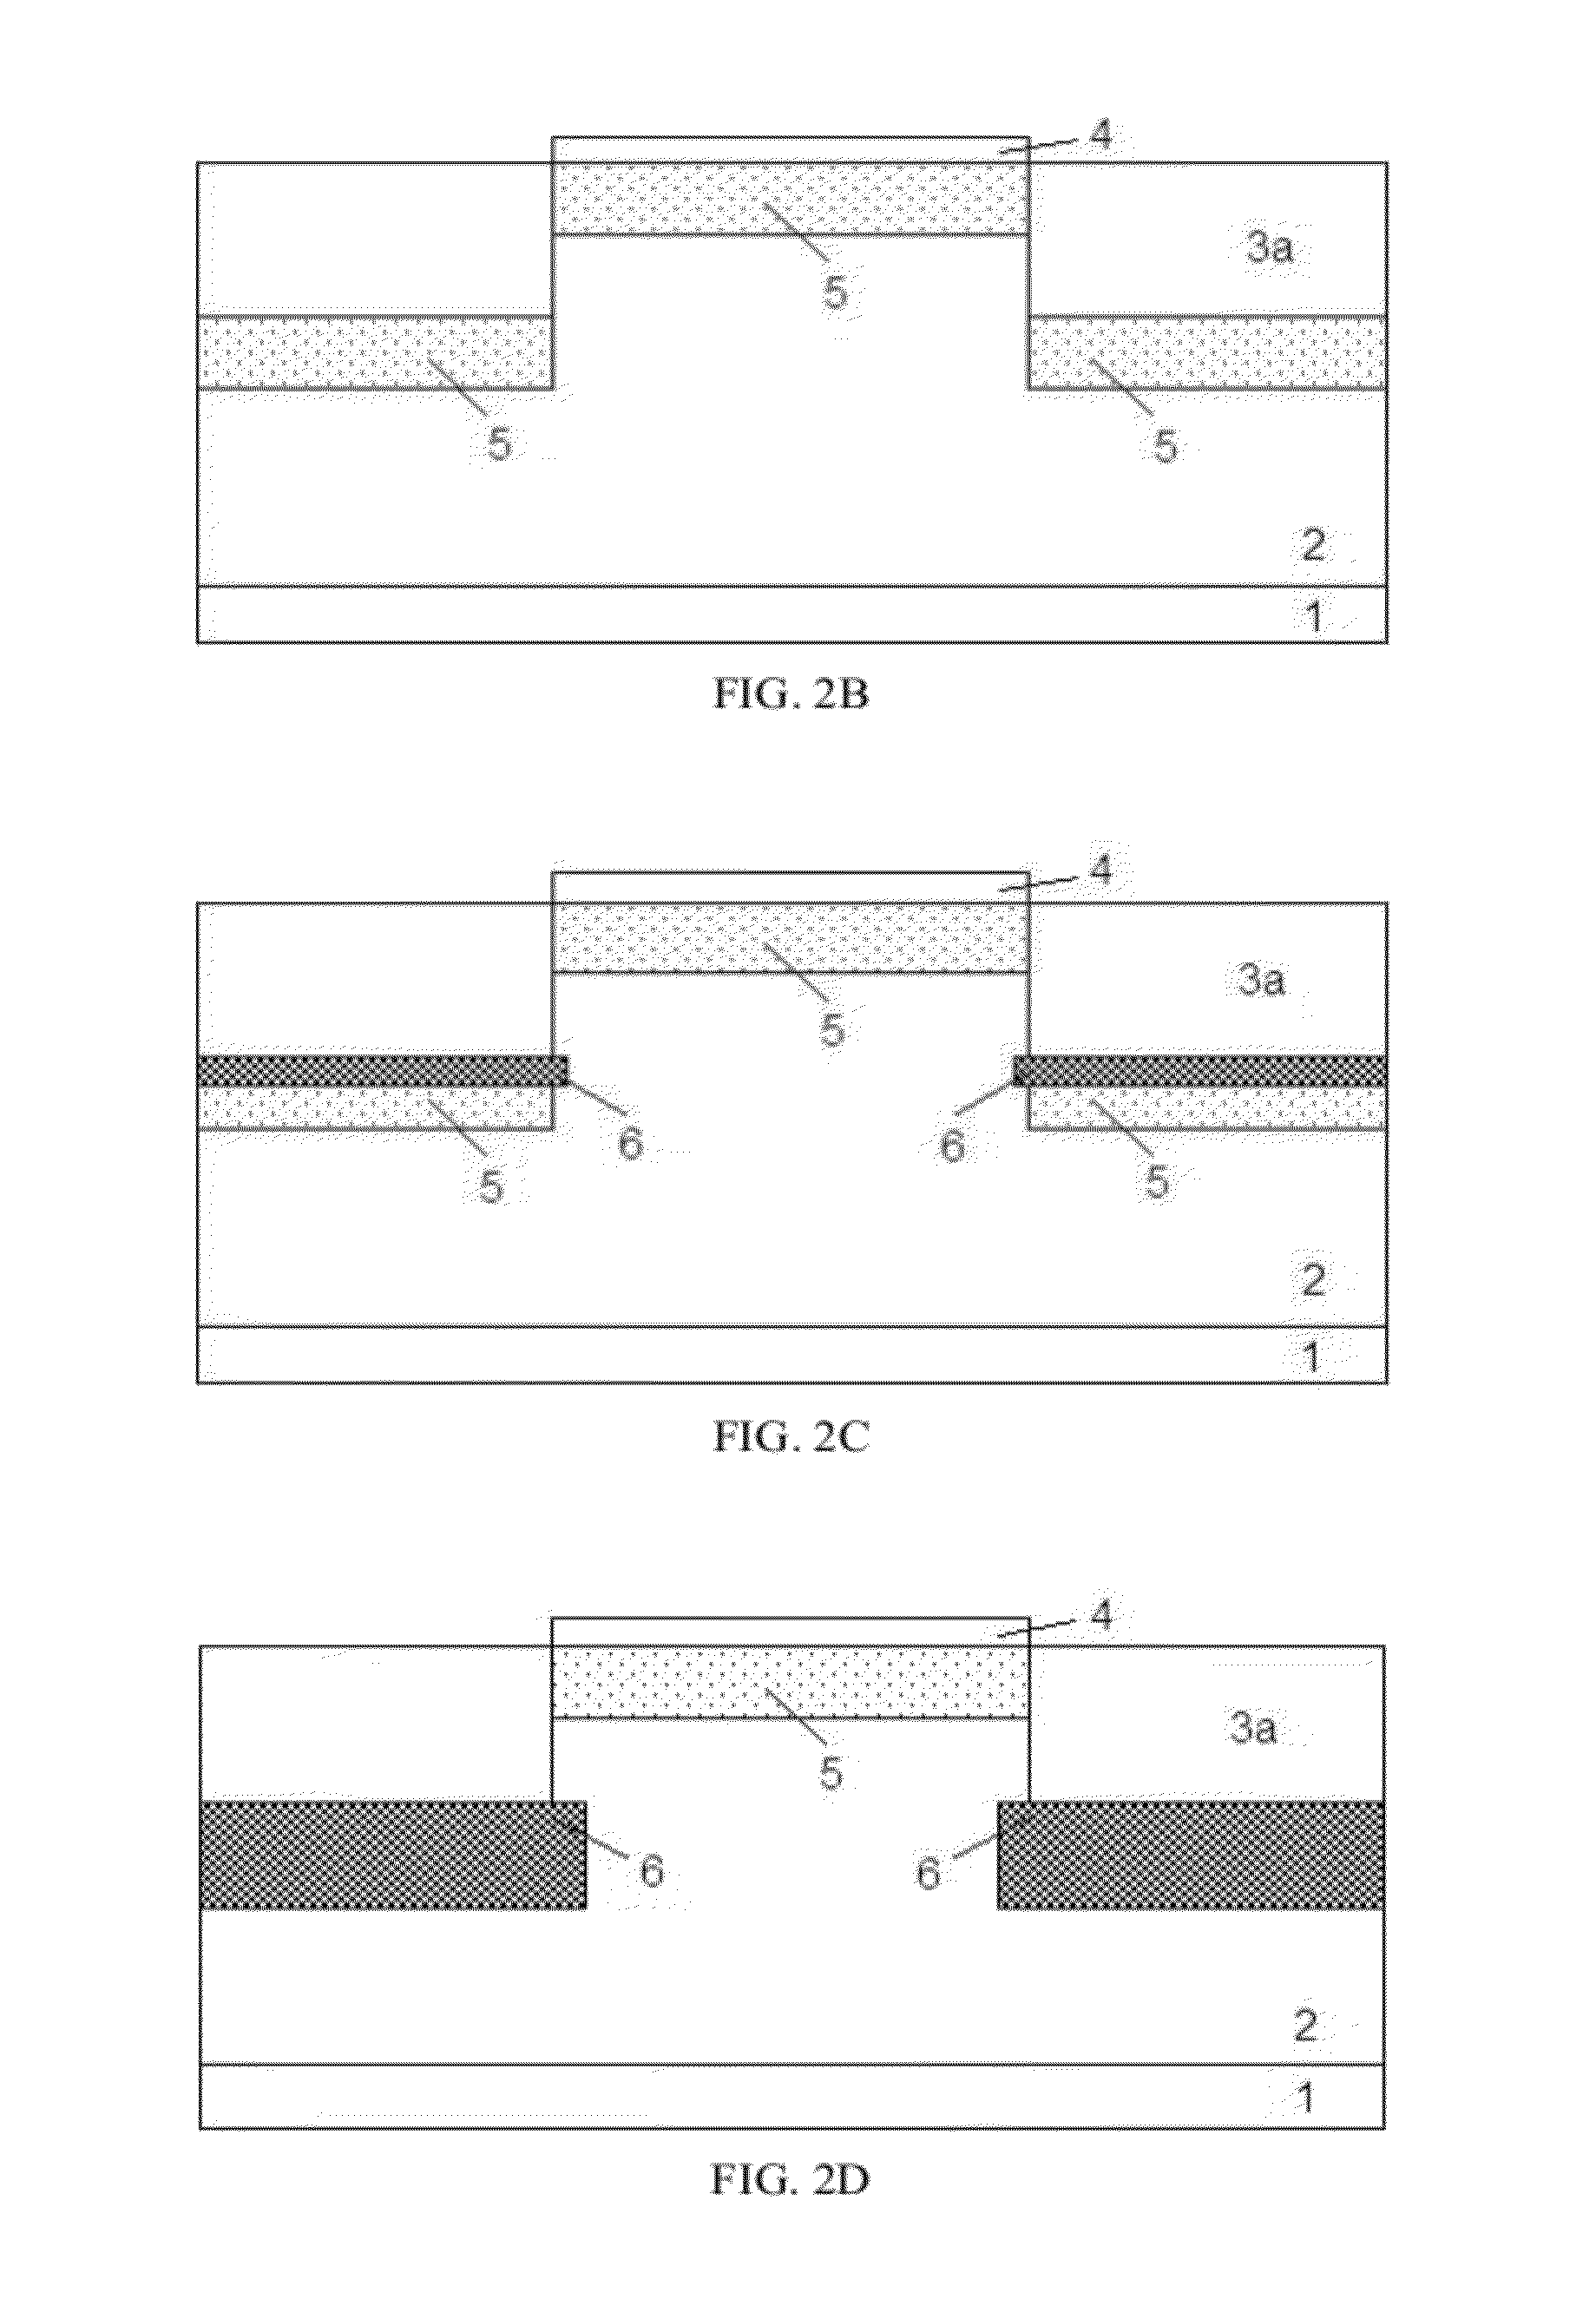 Vertical parasitic pnp device in a silicon-germanium hbt process and manufacturing method of the same